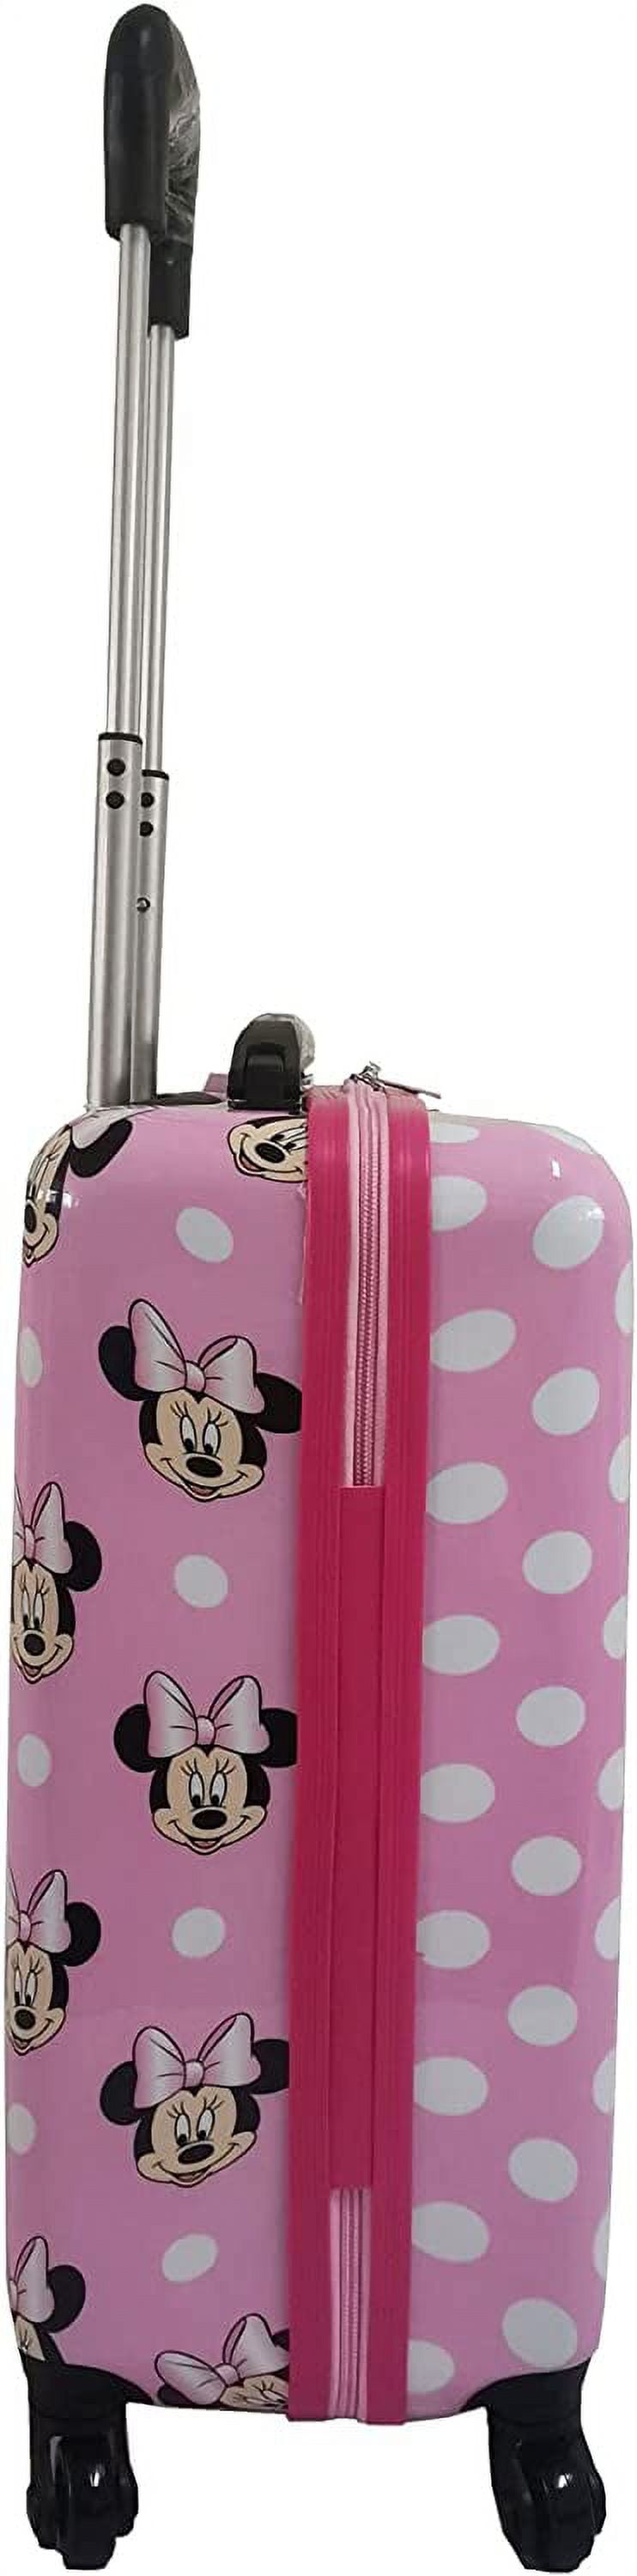 Fast Forward Minniee Mouse 20 inches Kids Luggage Hardside Tween Spinner  Carry-on Suitcase for Kids